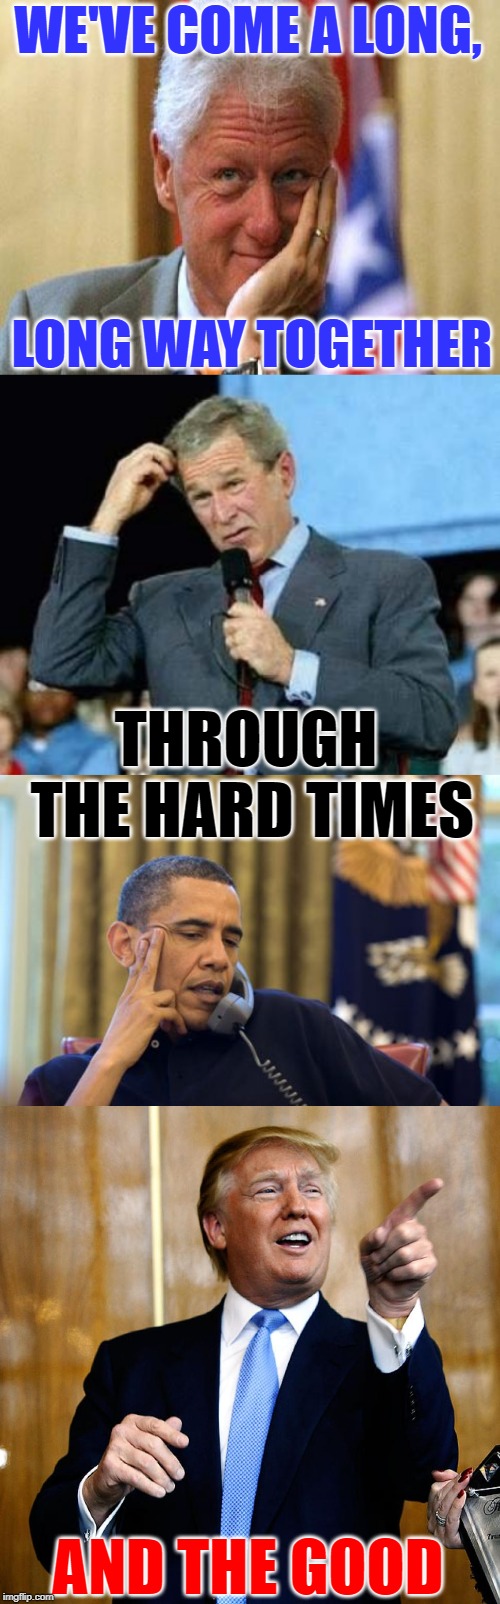 We've Come a Long Way, Baby | WE'VE COME A LONG, LONG WAY TOGETHER; THROUGH THE HARD TIMES; AND THE GOOD | image tagged in memes,no i cant obama,smiling bill clinton,confused bush,donal trump birthday,song lyrics | made w/ Imgflip meme maker